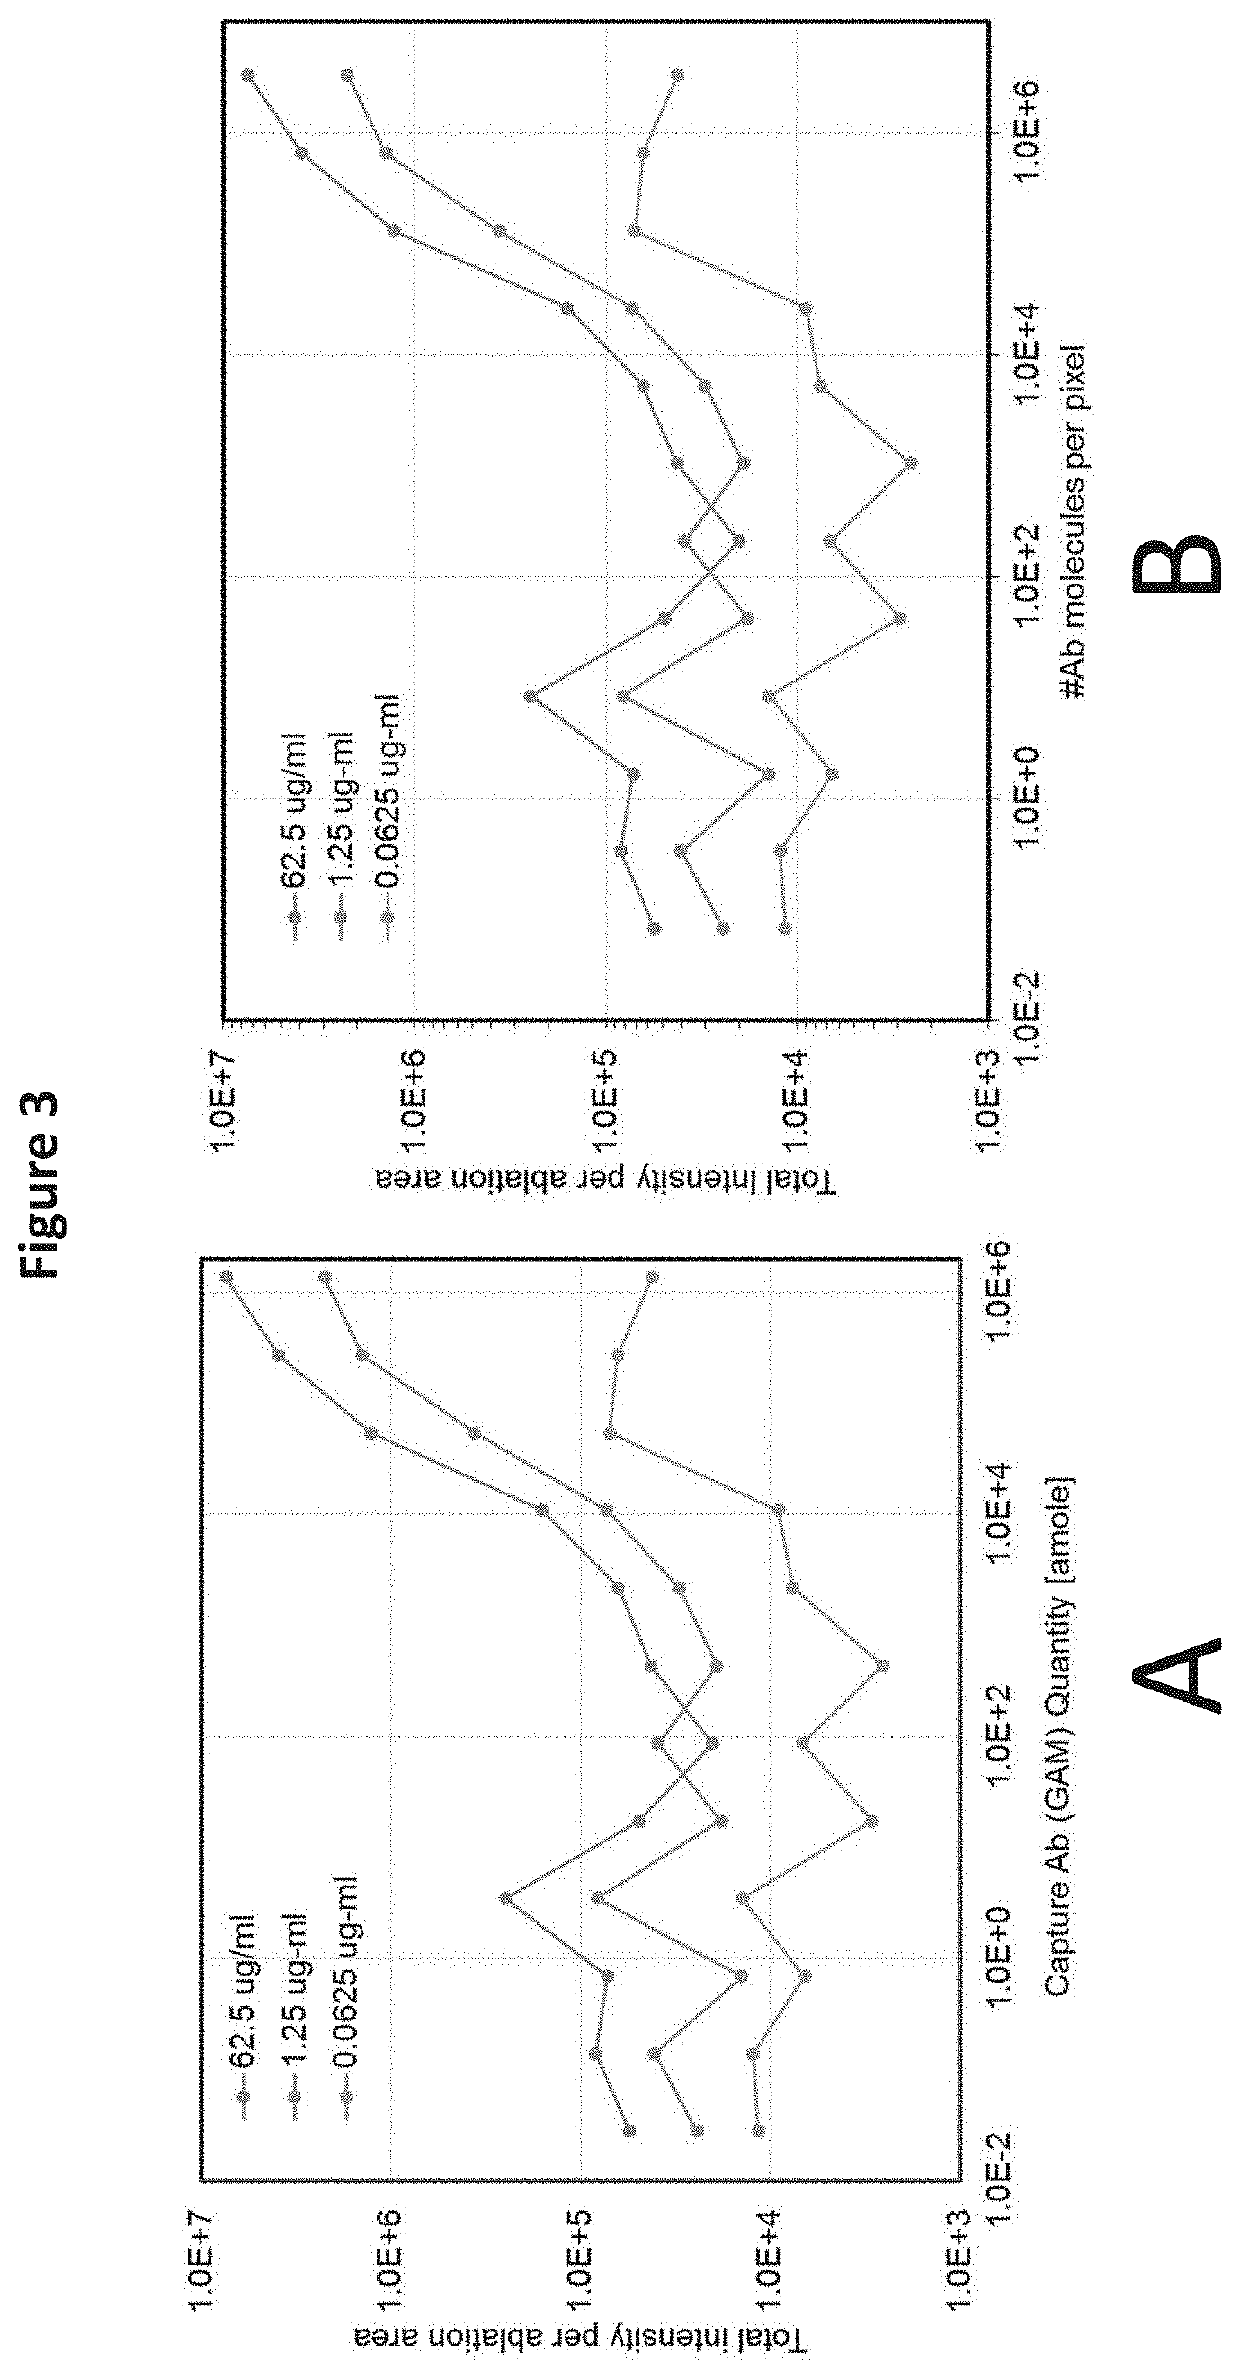 Reagents and methods for elemental mass spectrometry of biological samples